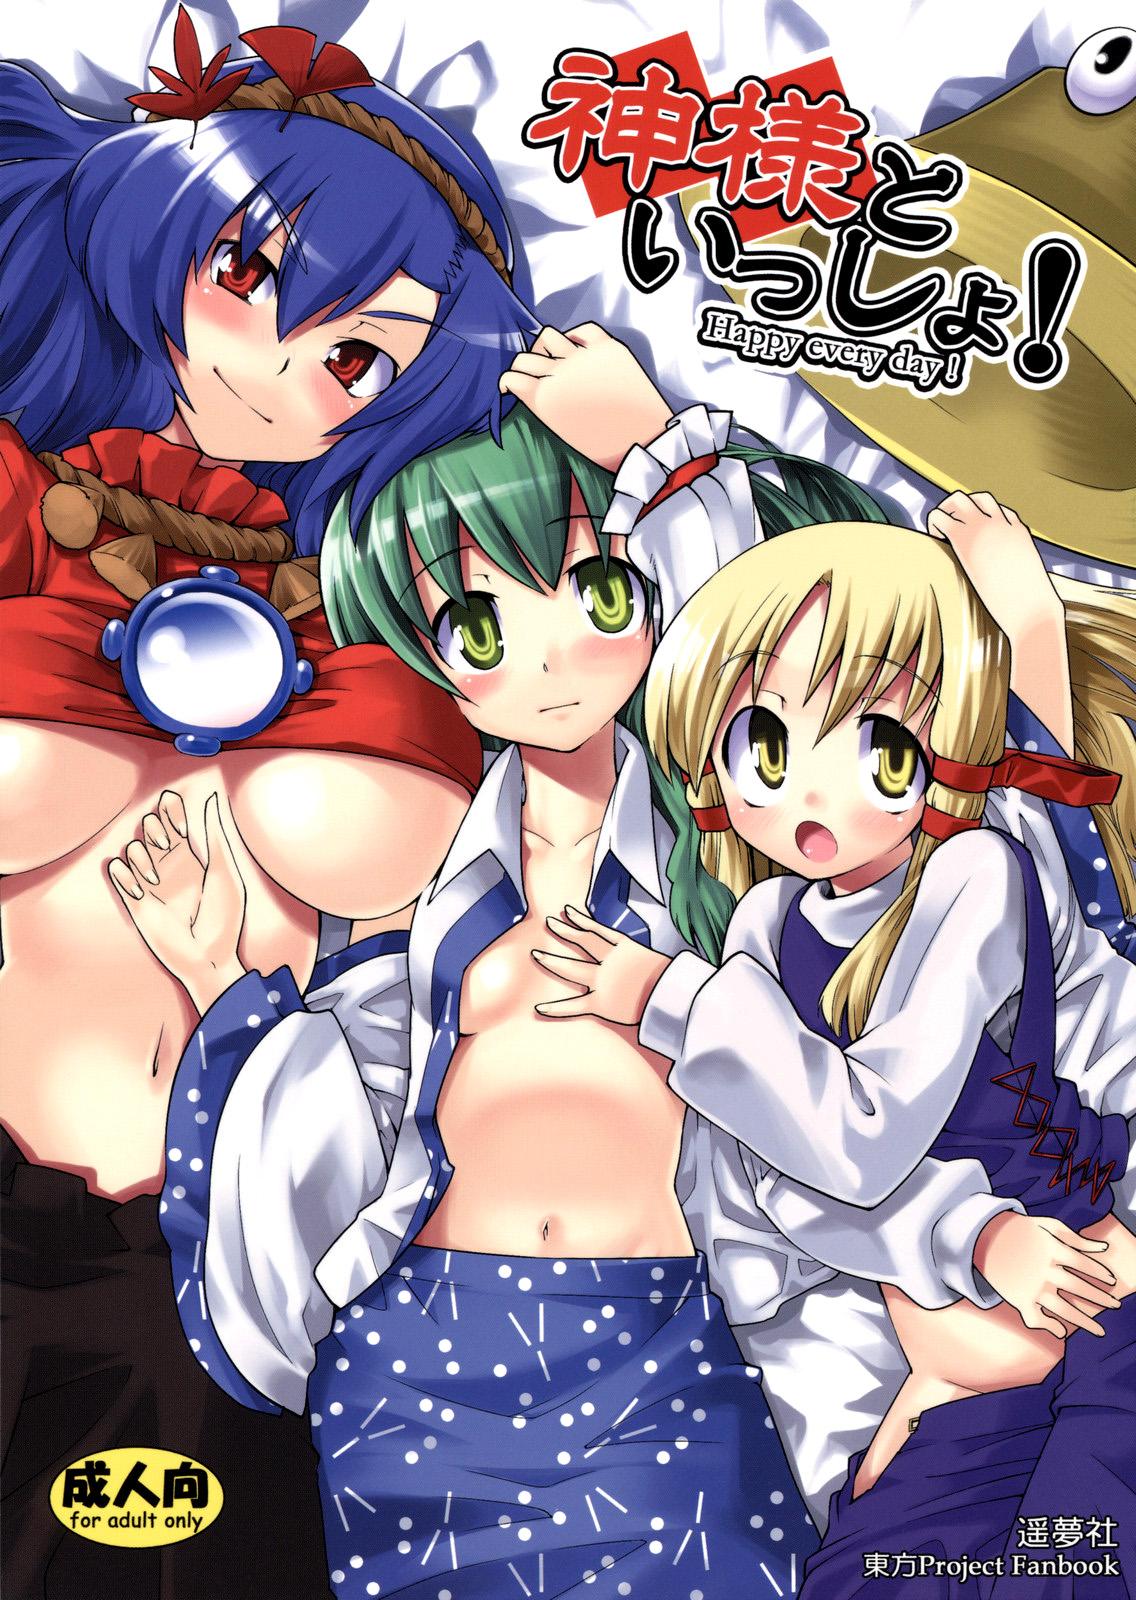 Outdoor Kami-sama to Issho! Happy every day! - Touhou project Assfucked - Page 1